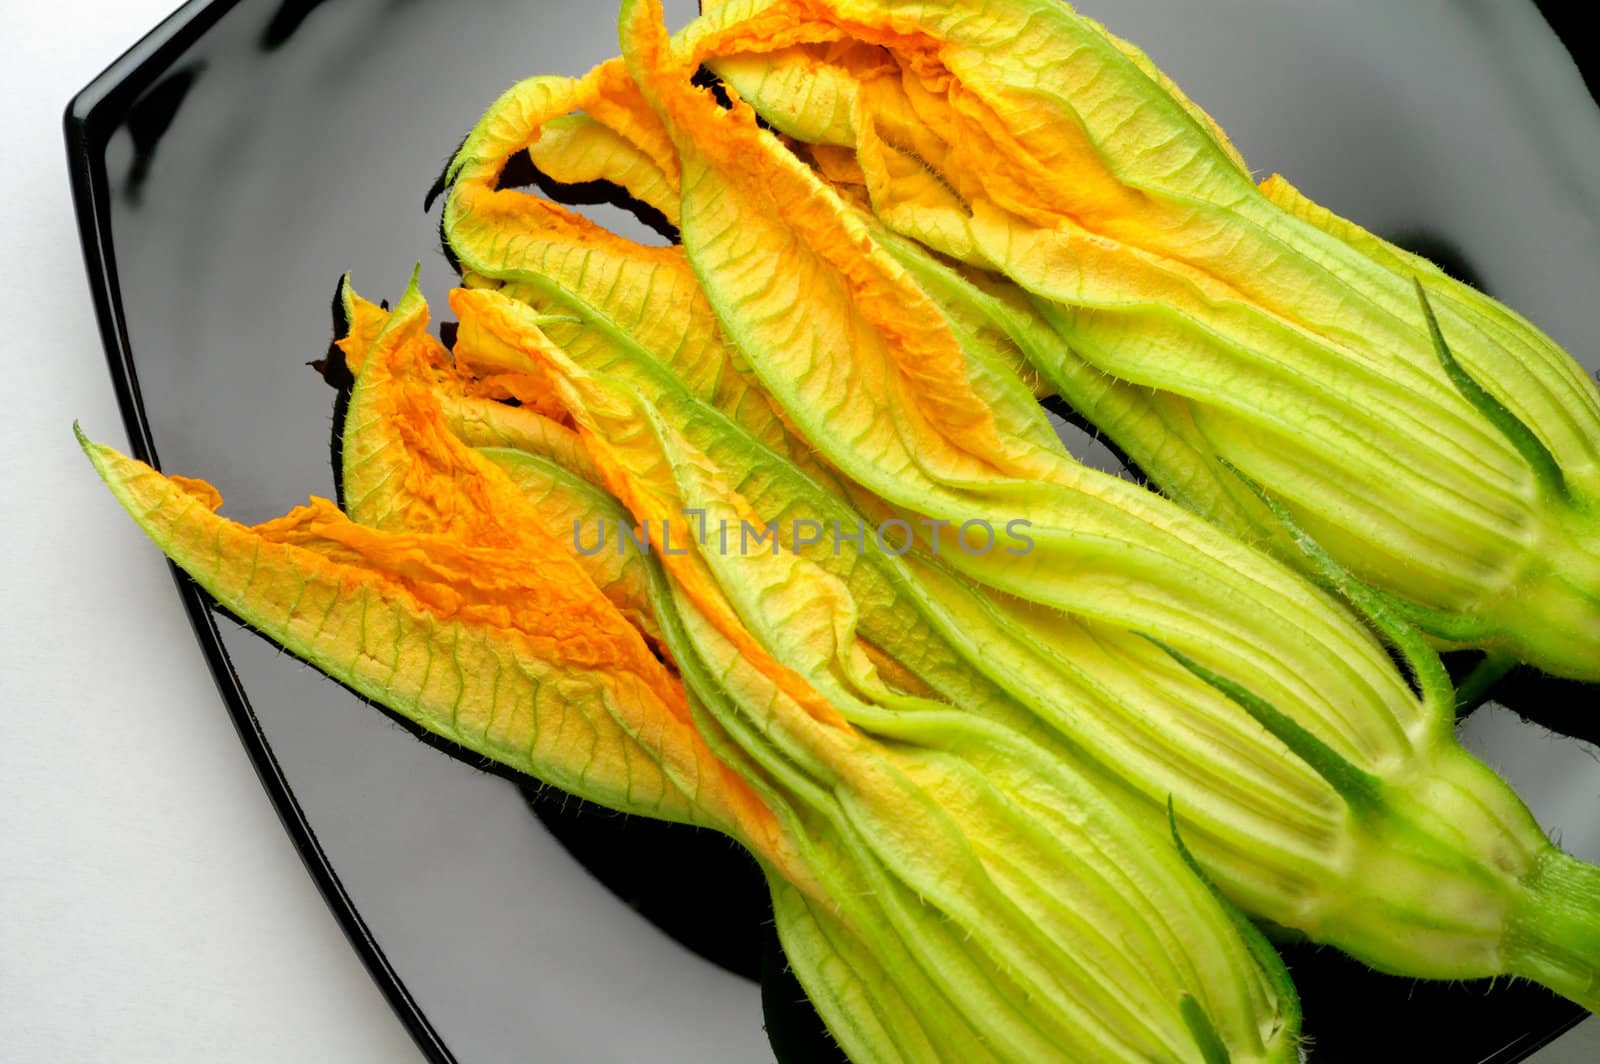 Zucchini flowers on black plate by Laborer